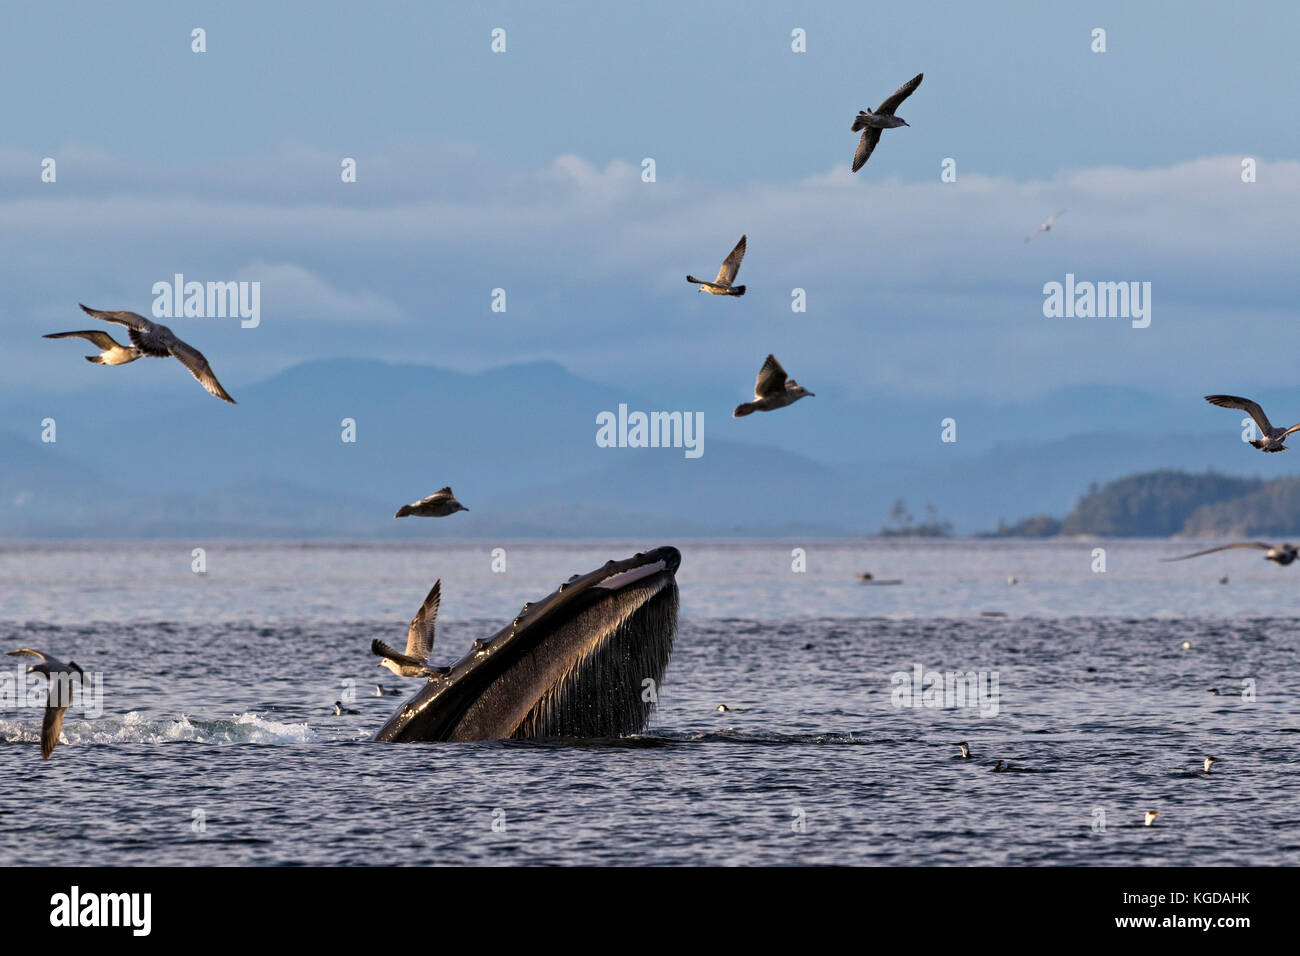 Humpback whale (Megaptera novaengliae) trap feeding in front of the British Columbia Coastal Mountains in Queen Charlotte Strait off Vancouver Island, Stock Photo